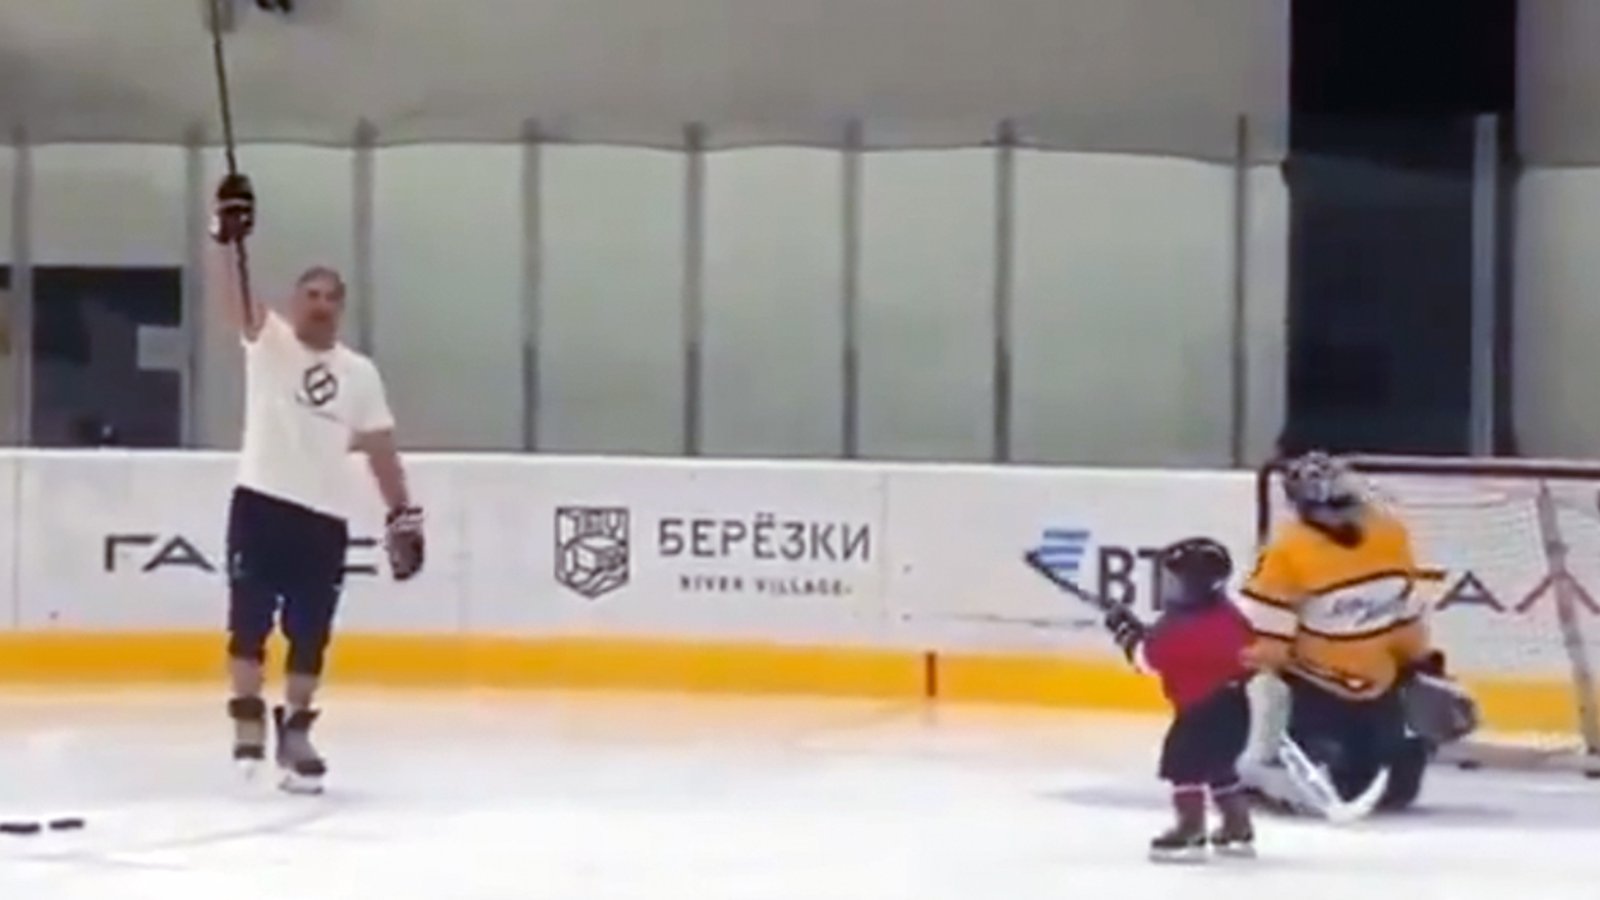 Sergei Ovechkin (2036 NHL Draft Eligible) rockets home a one-timer from the slot